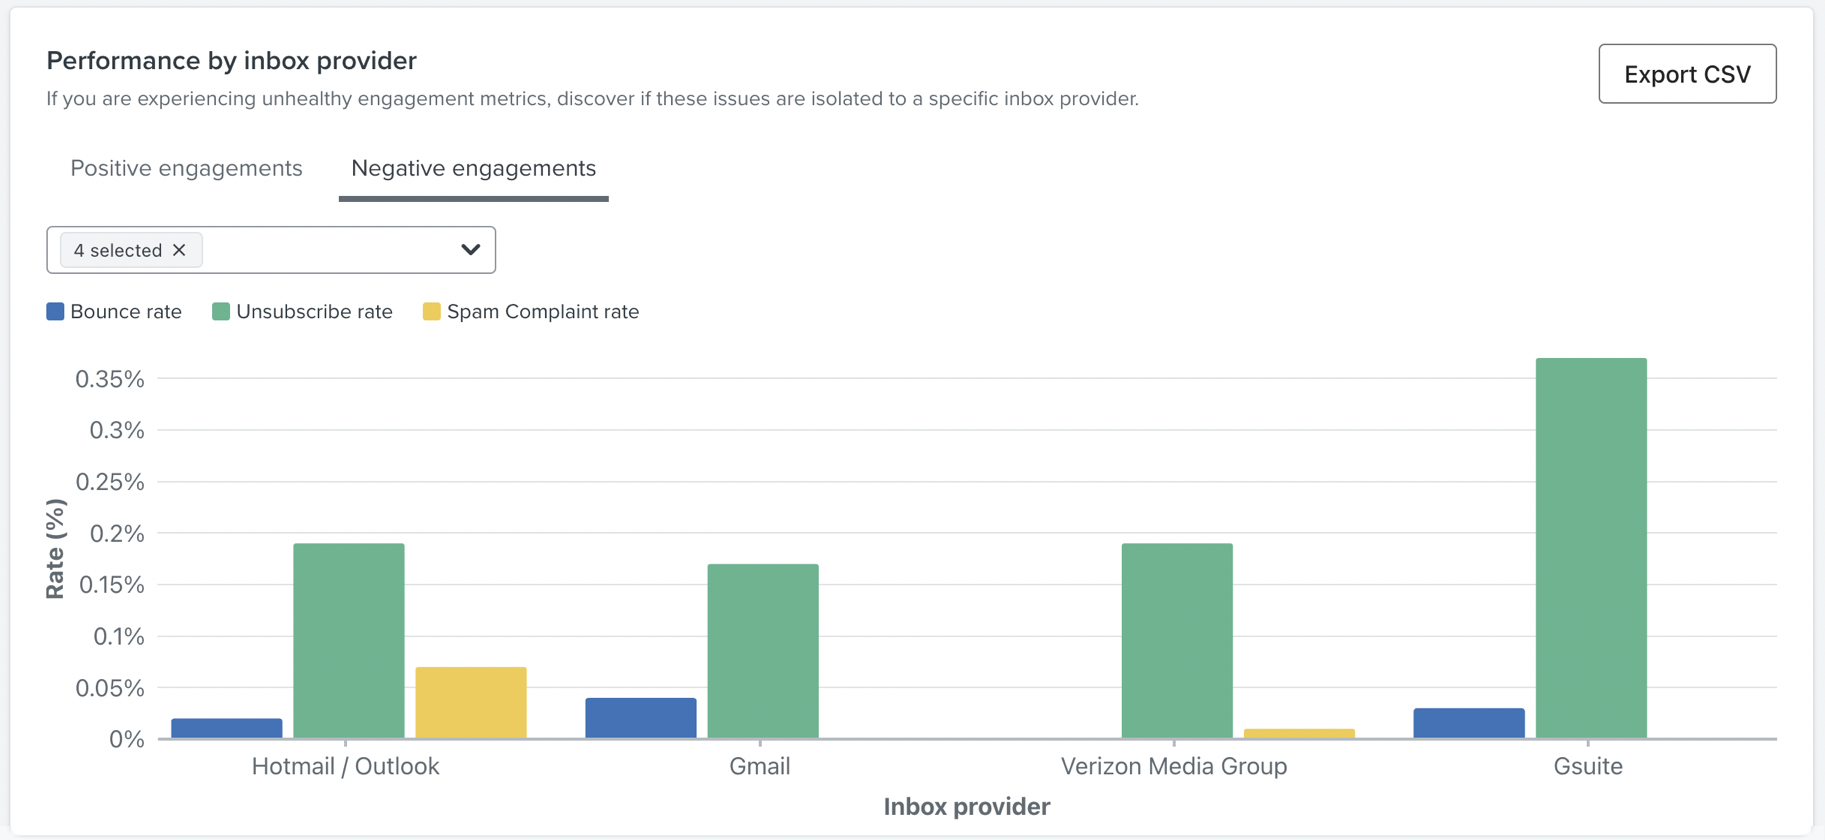 Performance by inbox provider chart showing negative engagements